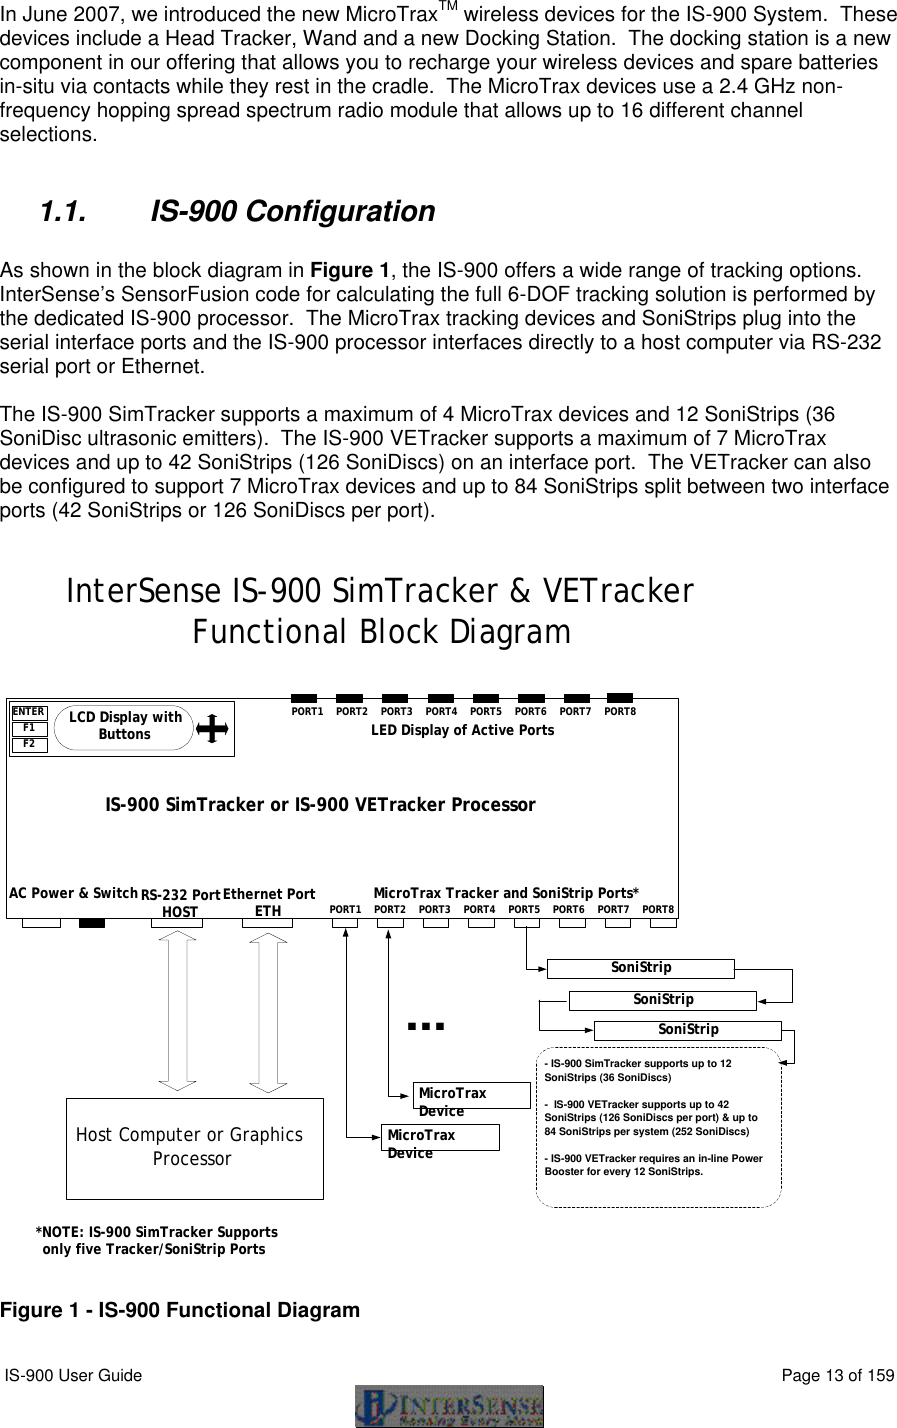  IS-900 User Guide                                                                                                                                          Page 13 of 159  In June 2007, we introduced the new MicroTraxTM wireless devices for the IS-900 System.  These devices include a Head Tracker, Wand and a new Docking Station.  The docking station is a new component in our offering that allows you to recharge your wireless devices and spare batteries in-situ via contacts while they rest in the cradle.  The MicroTrax devices use a 2.4 GHz non-frequency hopping spread spectrum radio module that allows up to 16 different channel selections.  1.1. IS-900 Configuration  As shown in the block diagram in Figure 1, the IS-900 offers a wide range of tracking options.  InterSense’s SensorFusion code for calculating the full 6-DOF tracking solution is performed by the dedicated IS-900 processor.  The MicroTrax tracking devices and SoniStrips plug into the serial interface ports and the IS-900 processor interfaces directly to a host computer via RS-232 serial port or Ethernet.    The IS-900 SimTracker supports a maximum of 4 MicroTrax devices and 12 SoniStrips (36 SoniDisc ultrasonic emitters).  The IS-900 VETracker supports a maximum of 7 MicroTrax devices and up to 42 SoniStrips (126 SoniDiscs) on an interface port.  The VETracker can also be configured to support 7 MicroTrax devices and up to 84 SoniStrips split between two interface ports (42 SoniStrips or 126 SoniDiscs per port).      Figure 1 - IS-900 Functional Diagram    PORT1 RS-232 Port HOST MicroTrax Device IS-900 SimTracker or IS-900 VETracker Processor MicroTrax Device AC Power &amp; Switch LCD Display with Buttons Ethernet Port ETH PORT2 PORT3 PORT4 PORT5 PORT6 PORT7 PORT8 MicroTrax Tracker and SoniStrip Ports* PORT1 PORT2 PORT3 PORT4 PORT5 PORT6 PORT7 PORT8 LED Display of Active Ports ENTER F1 F2  *NOTE: IS-900 SimTracker Supports only five Tracker/SoniStrip Ports ... SoniStrip SoniStrip SoniStrip - IS-900 SimTracker supports up to 12 SoniStrips (36 SoniDiscs) -  IS-900 VETracker supports up to 42 SoniStrips (126 SoniDiscs per port) &amp; up to 84 SoniStrips per system (252 SoniDiscs) - IS-900 VETracker requires an in-line Power Booster for every 12 SoniStrips. Host Computer or Graphics Processor InterSense IS-900 SimTracker &amp; VETracker Functional Block Diagram    